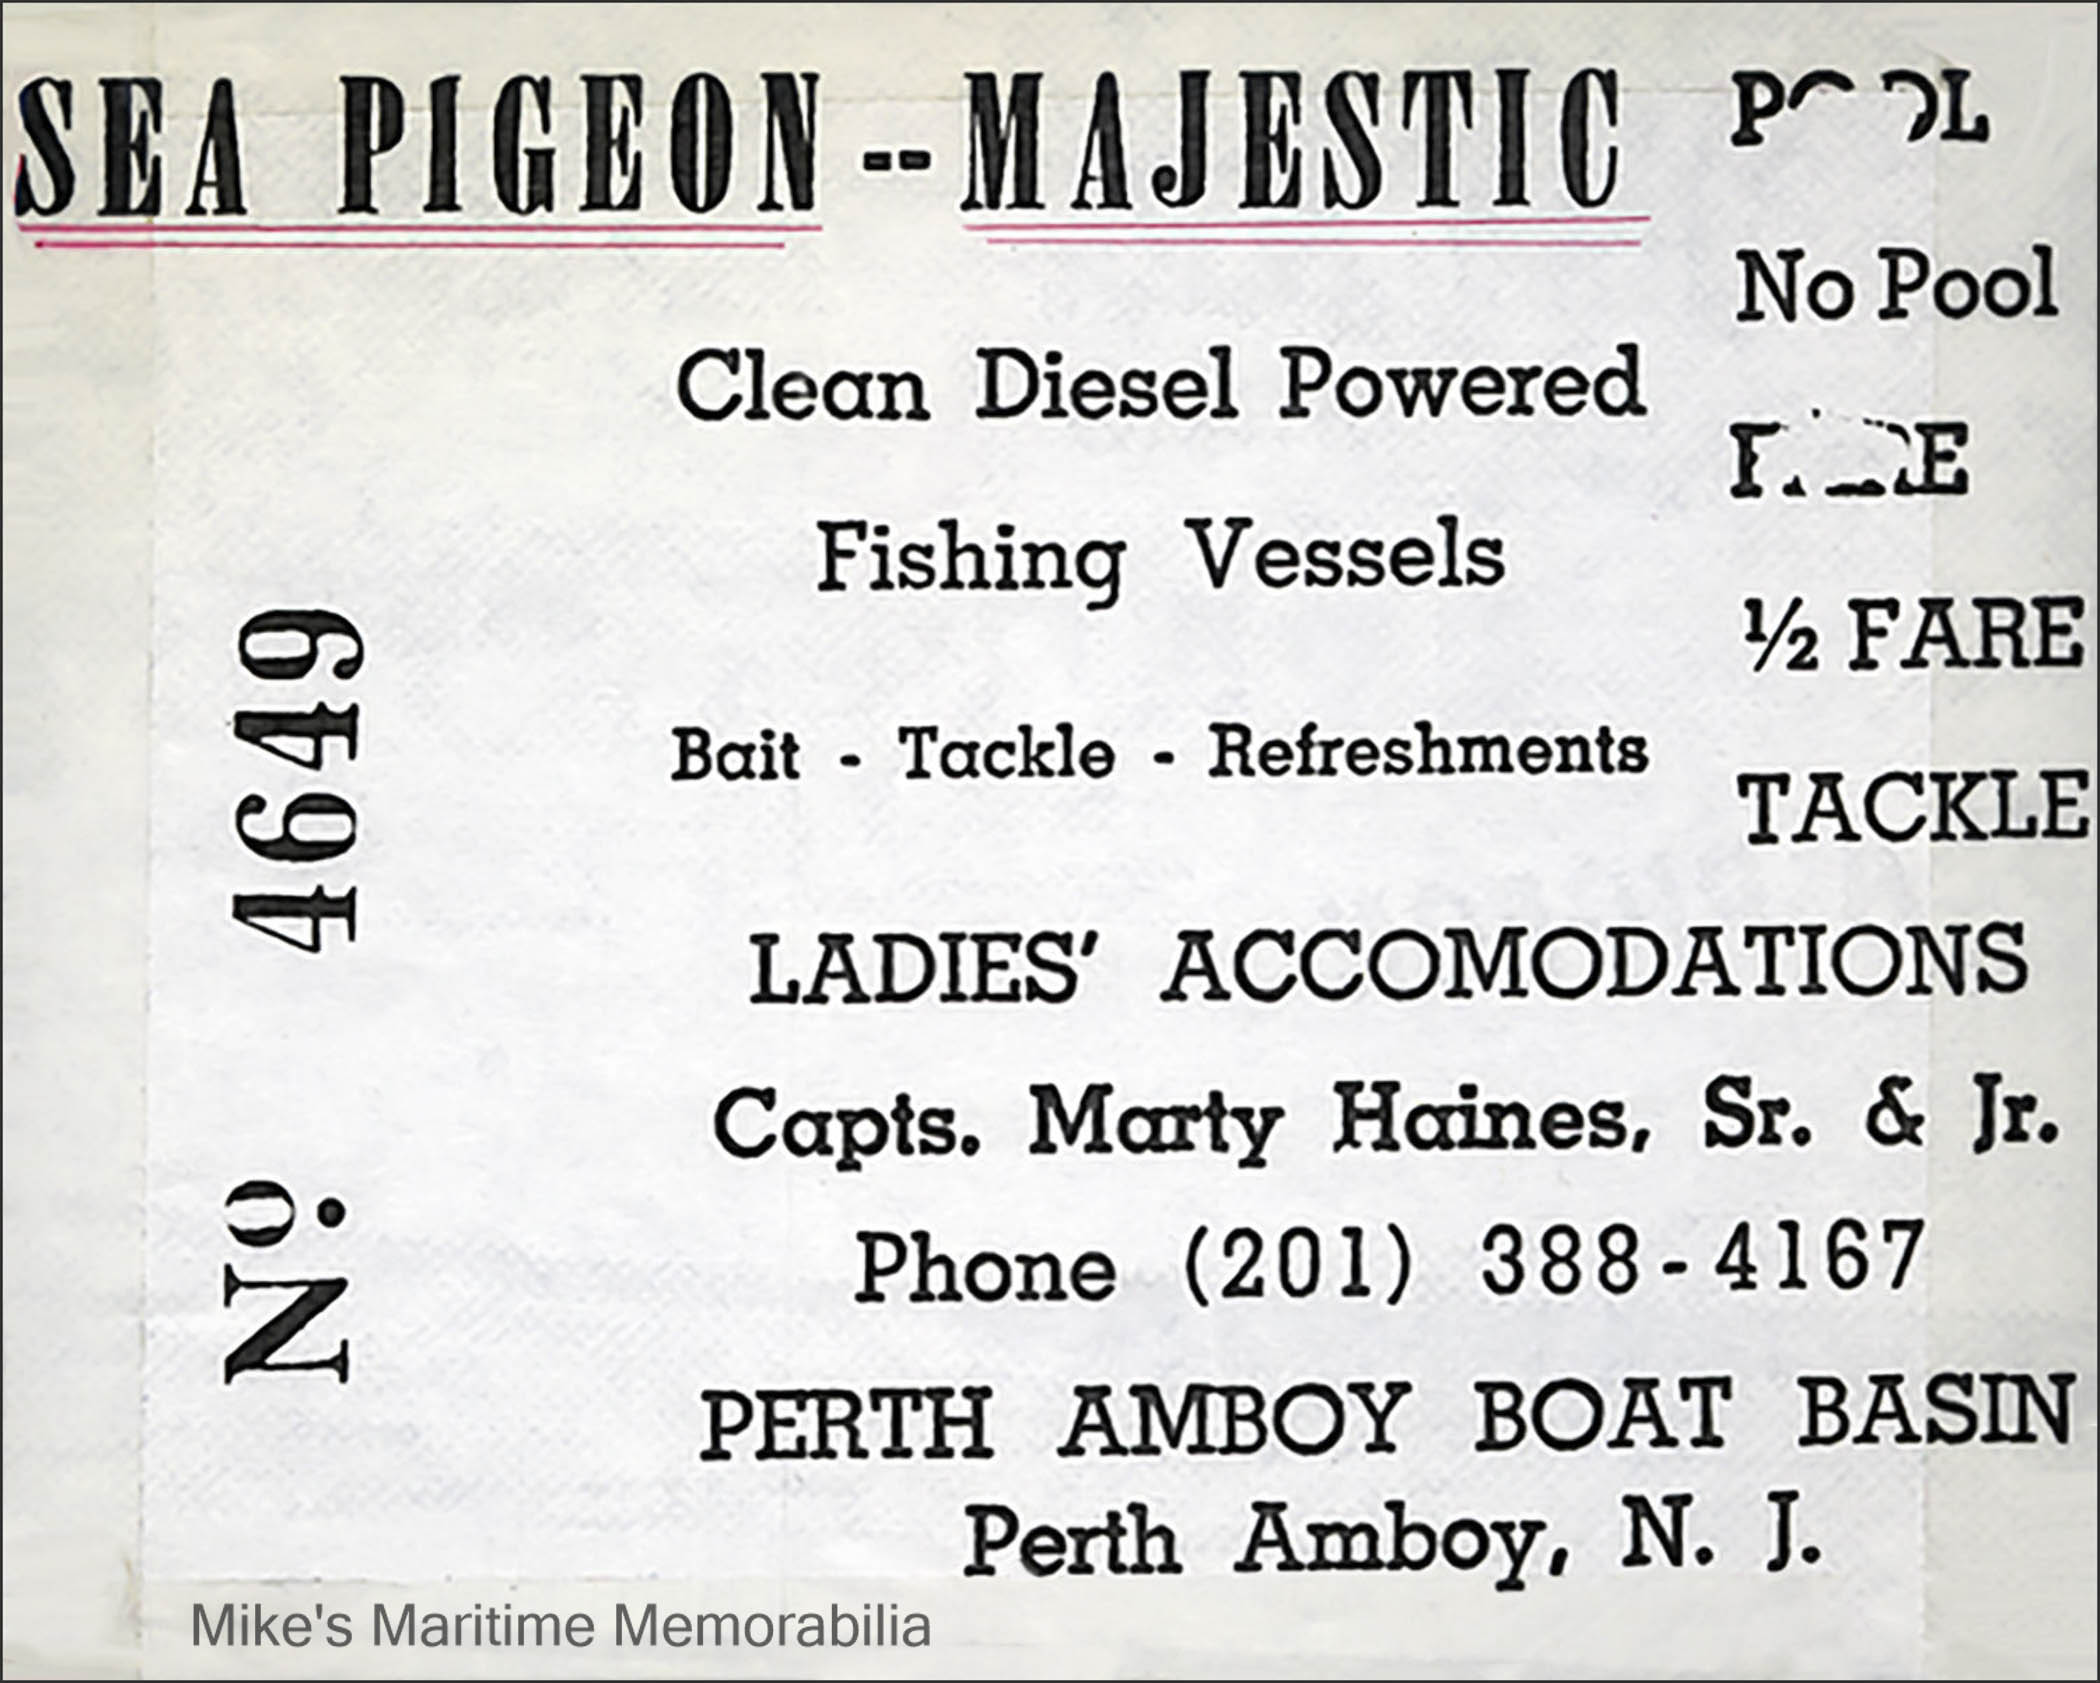 SEA PIGEON–MAJESTIC Fare Ticket – 1970 A common fare ticket used by the Perth Amboy, NJ party boats "SEA PIGEON" and "MAJESTIC" circa 1970. The "SEA PIGEON" was skippered by Captain Marty Haines Sr. and the "MAJESTIC" by Captain Marty Haines Jr.